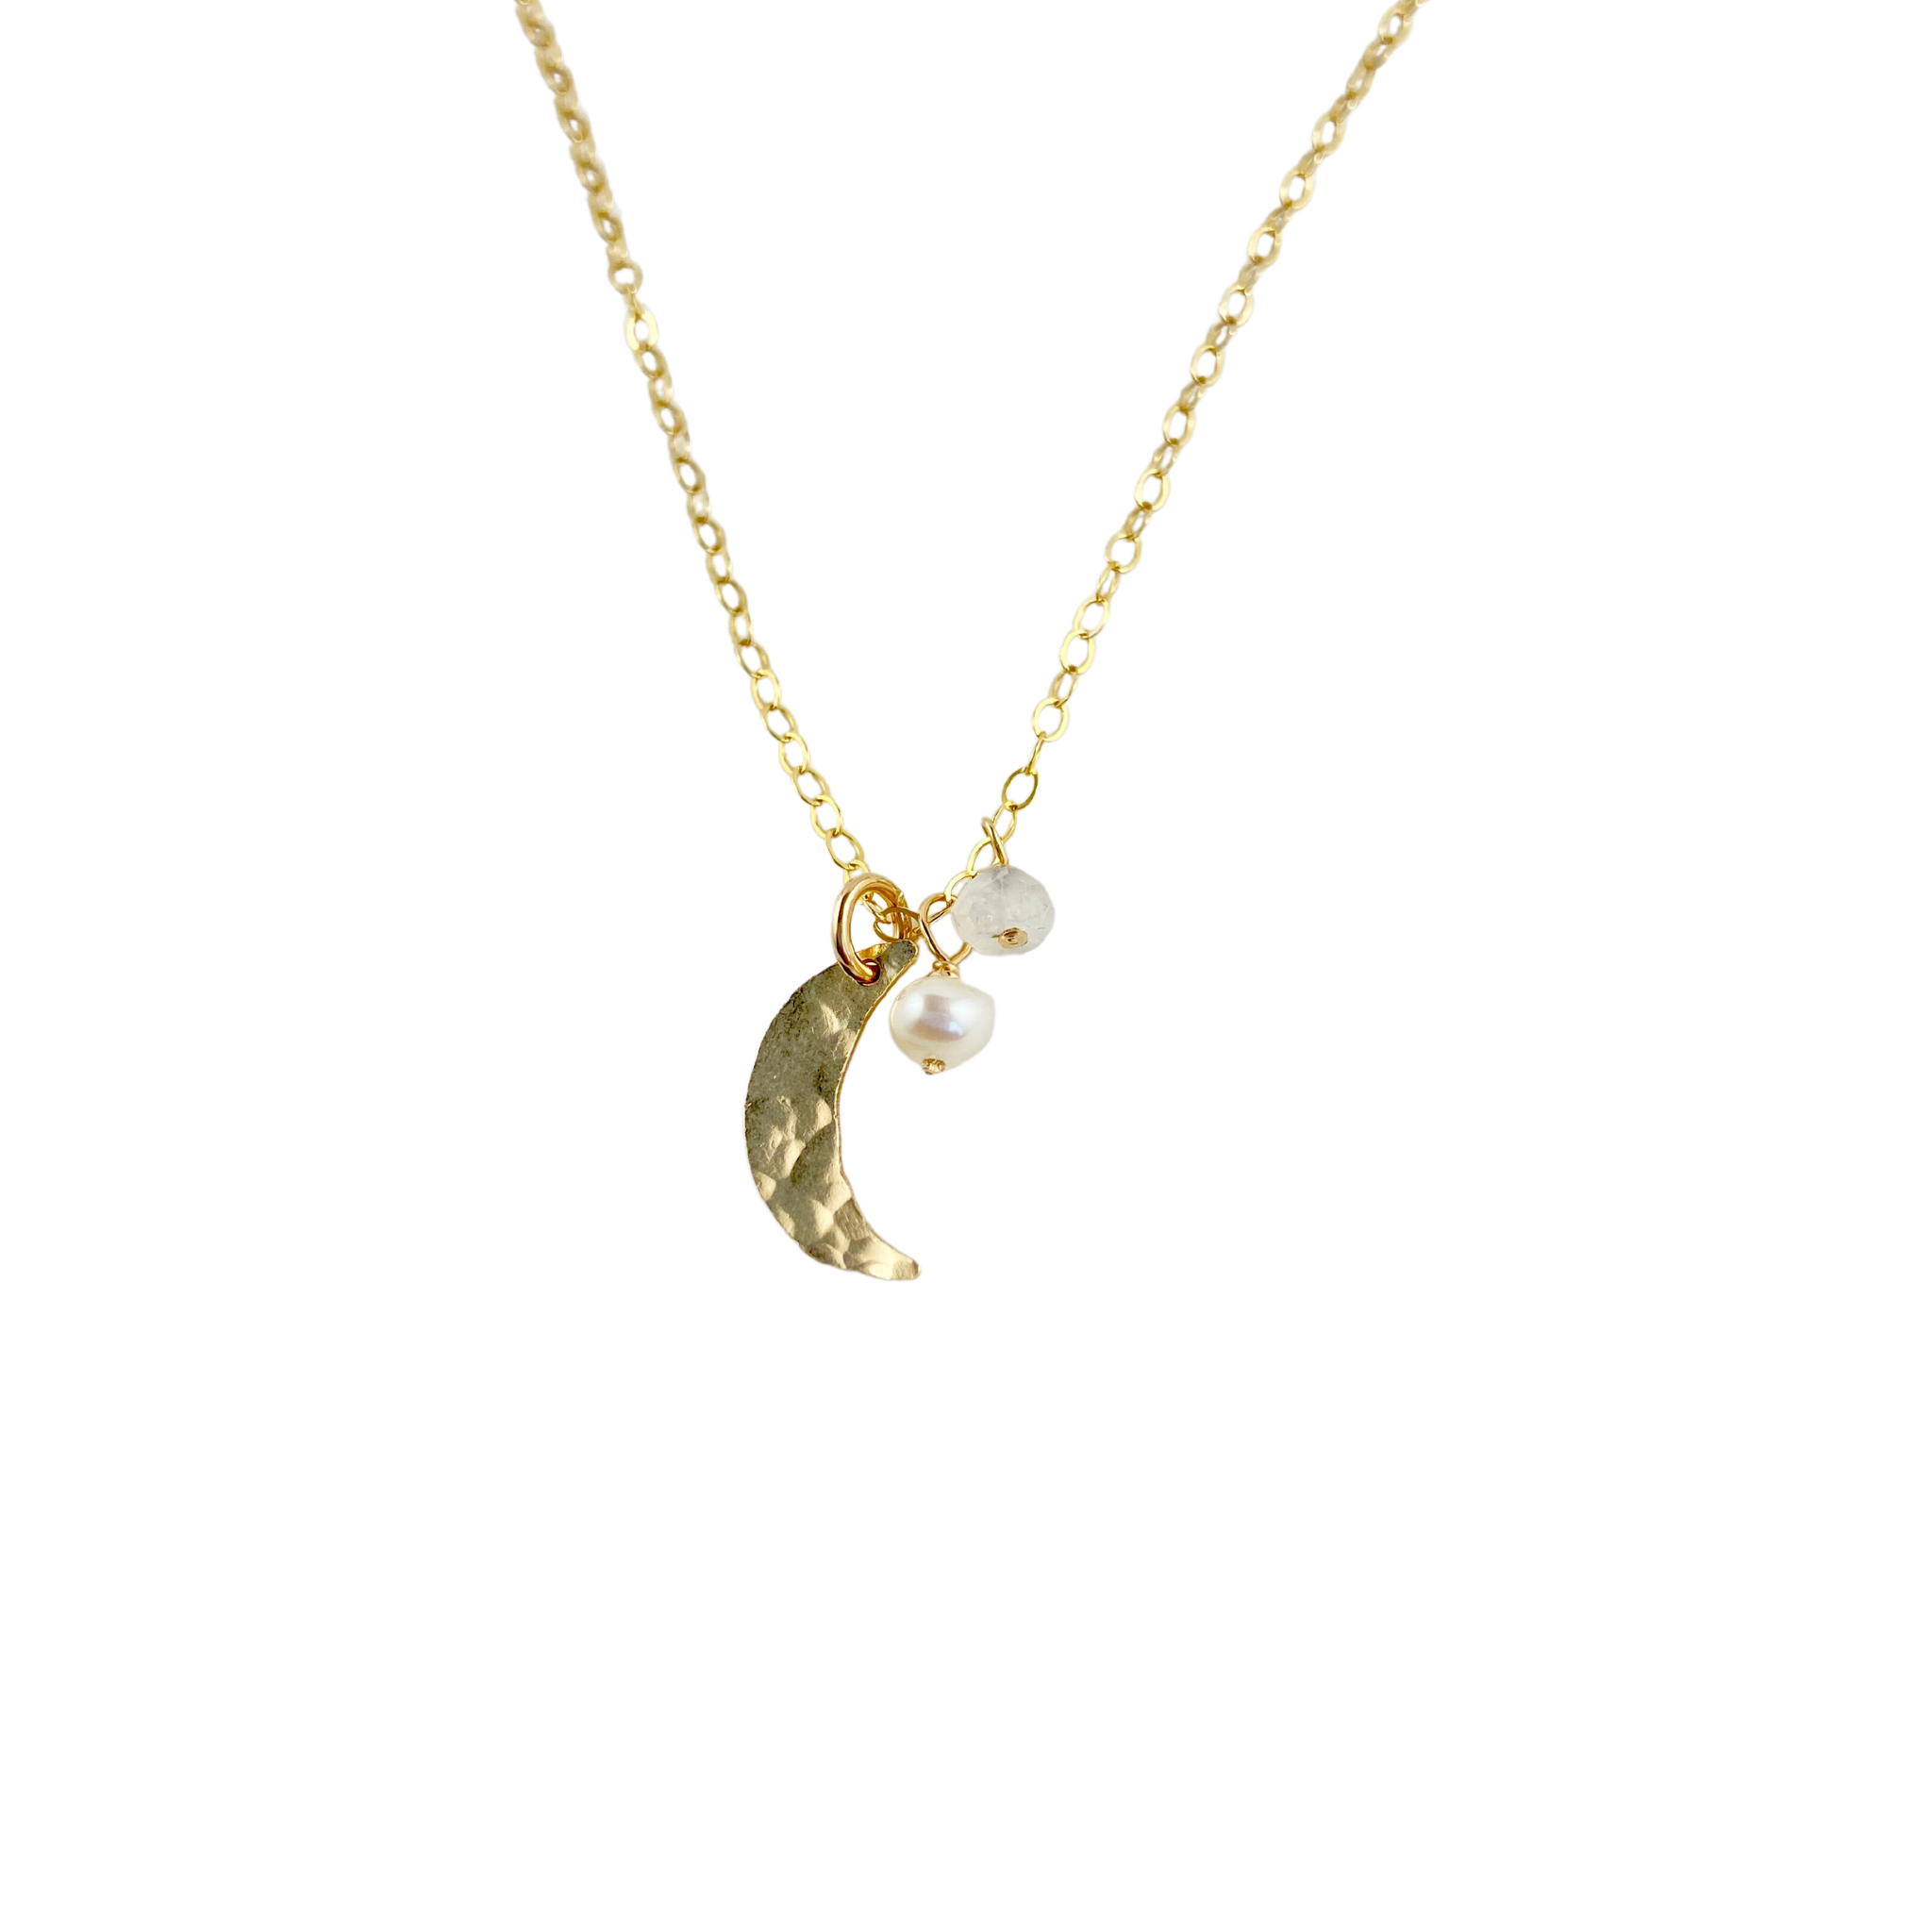 Dreamer Large Moon Pearl Moonstone Necklace